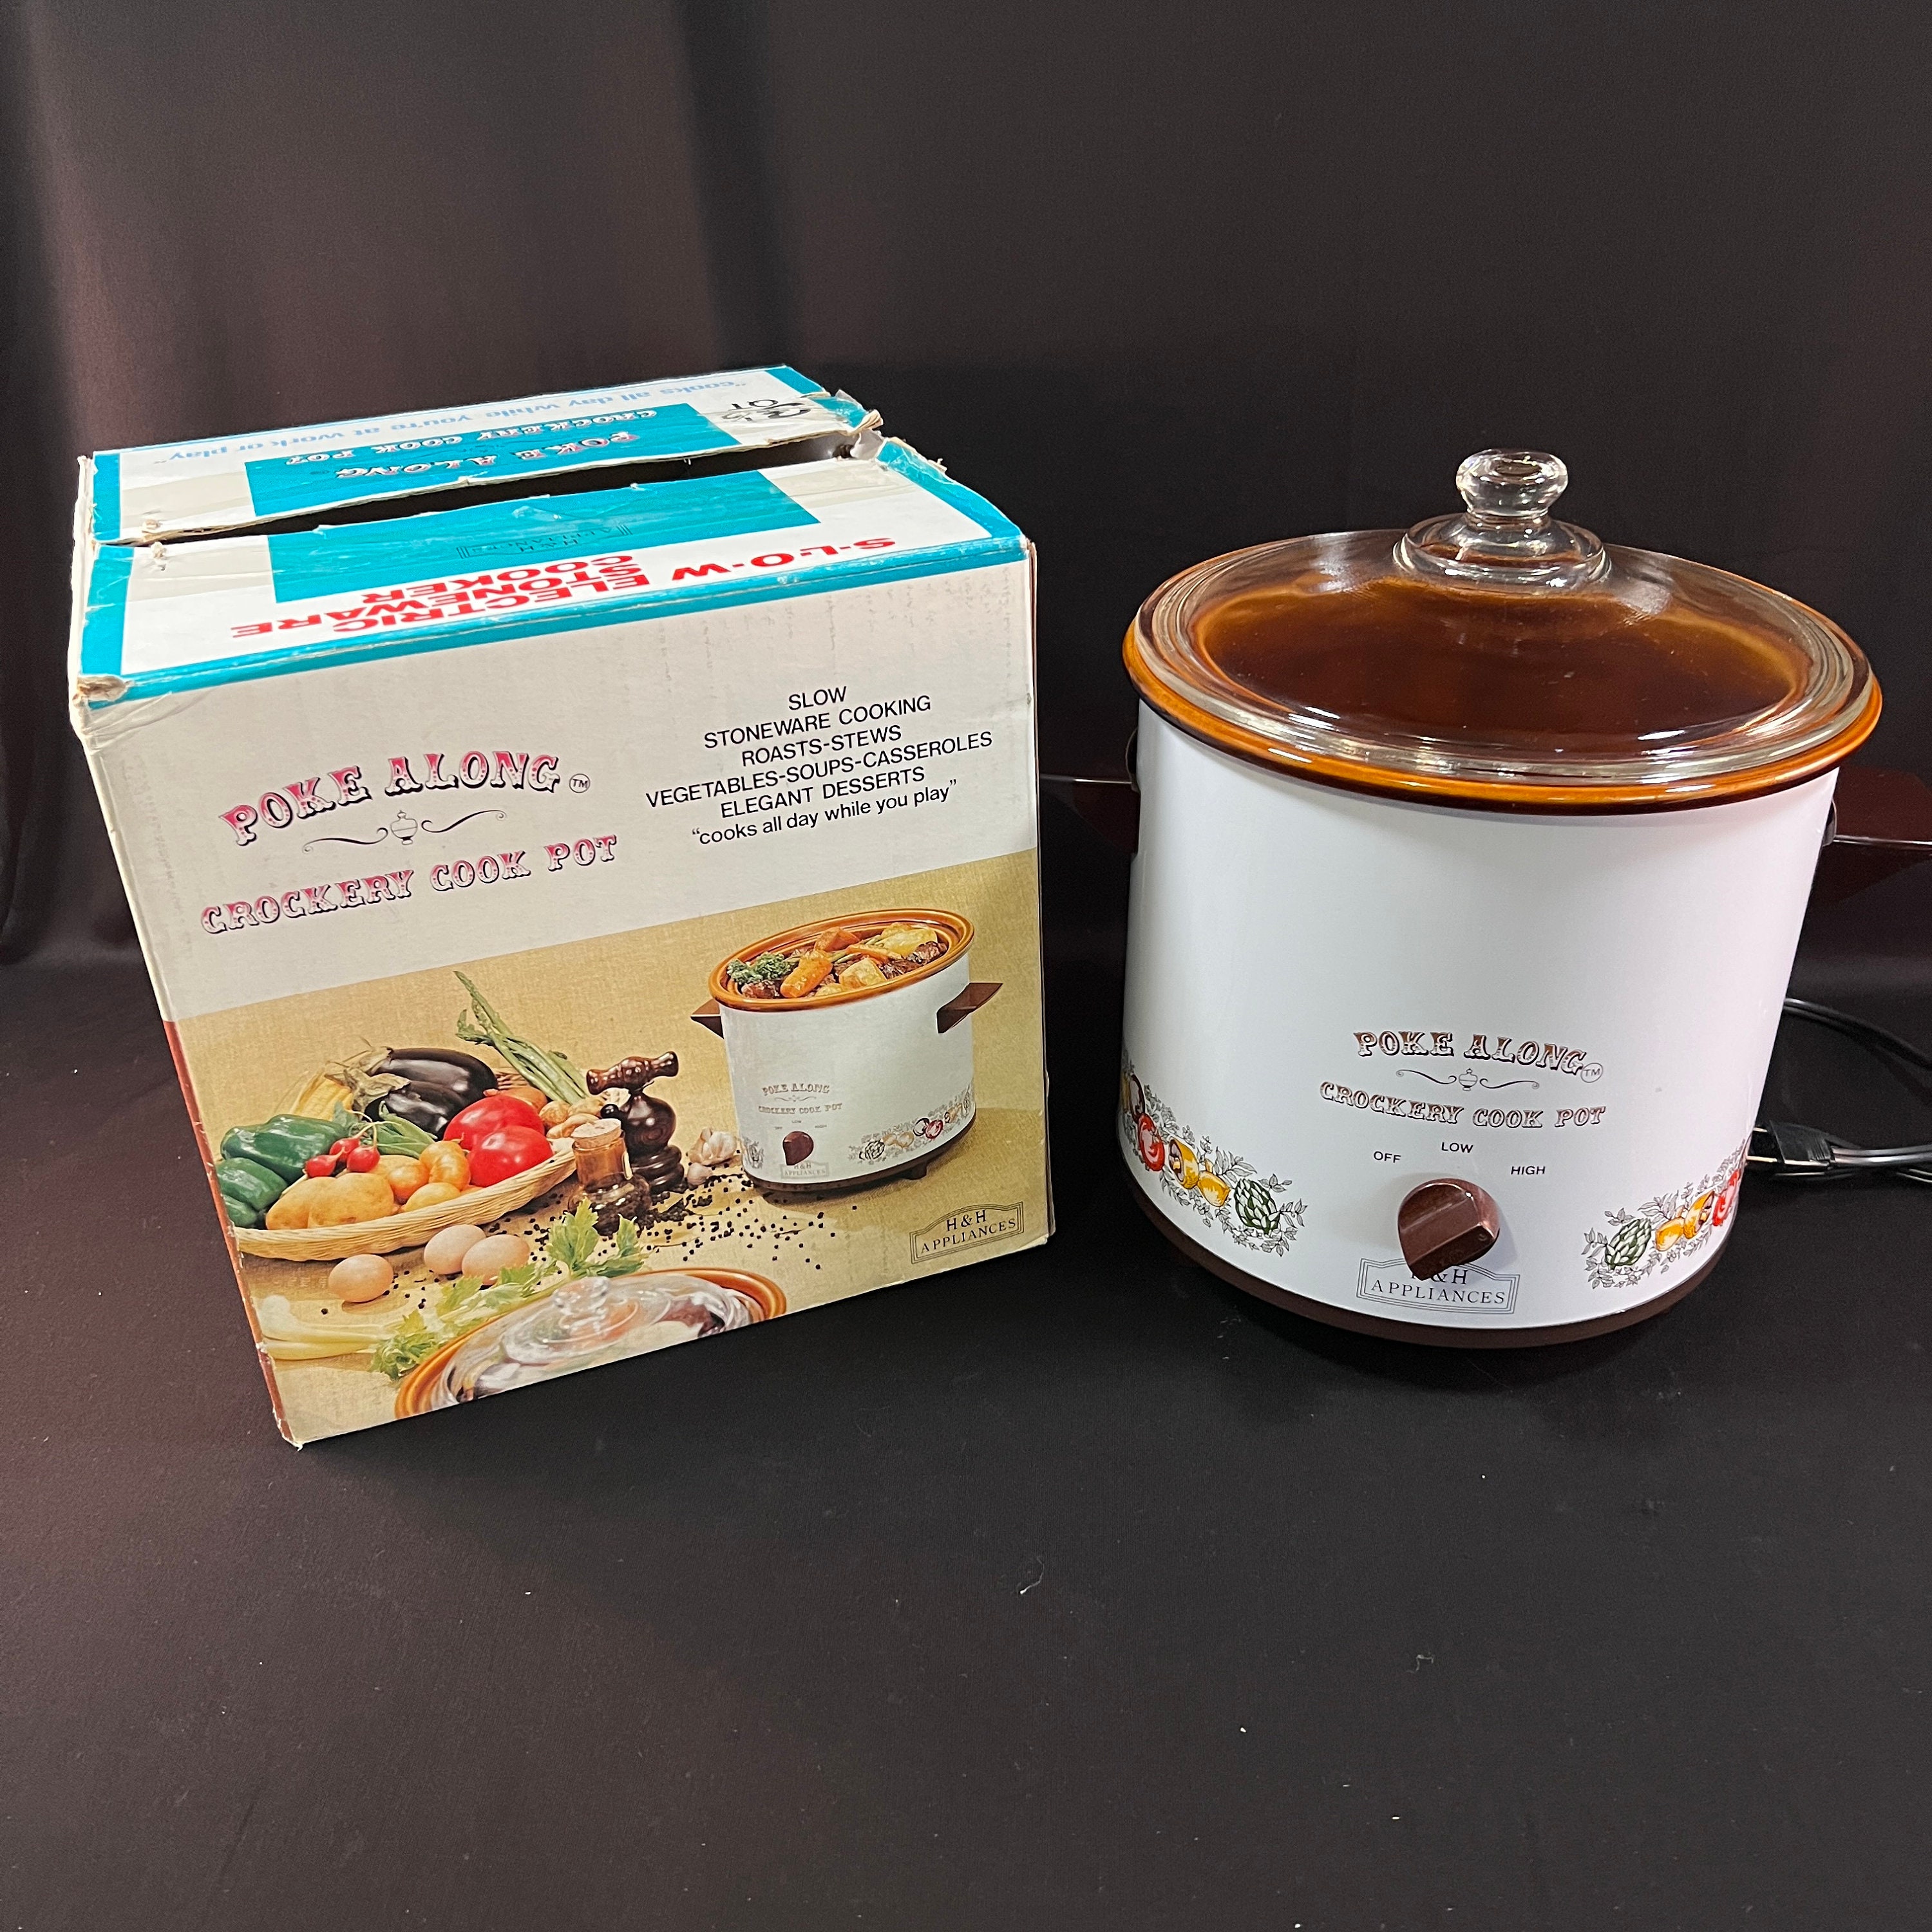 Spice of Life Slow Cooker, 3-1/2 Quart, Temperature Dial Low, High, Off,  Poke A Long Crockery Cook Pot, in Working Order in Original Box 